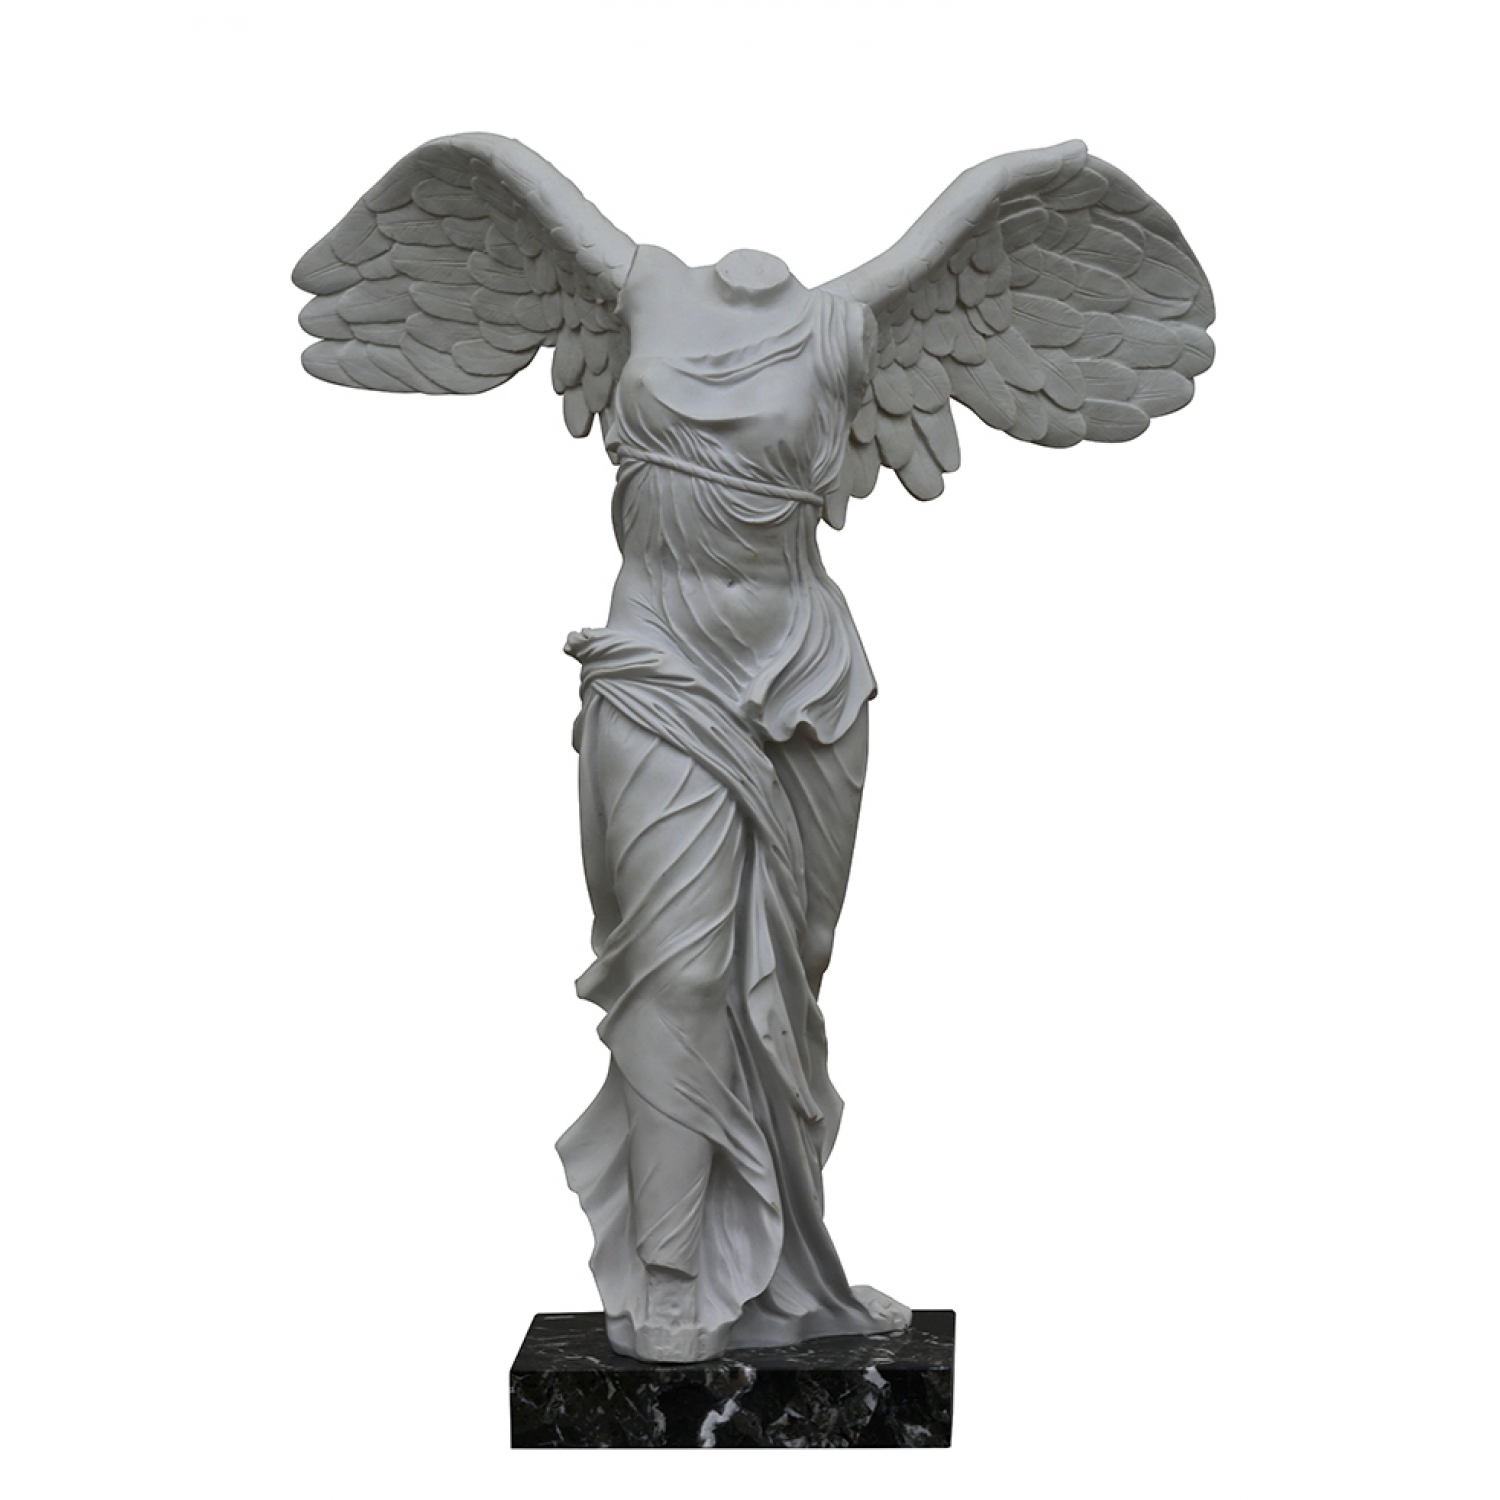 OF SAMOTHRACE E.Furiesi): Buy Art objects from Italy